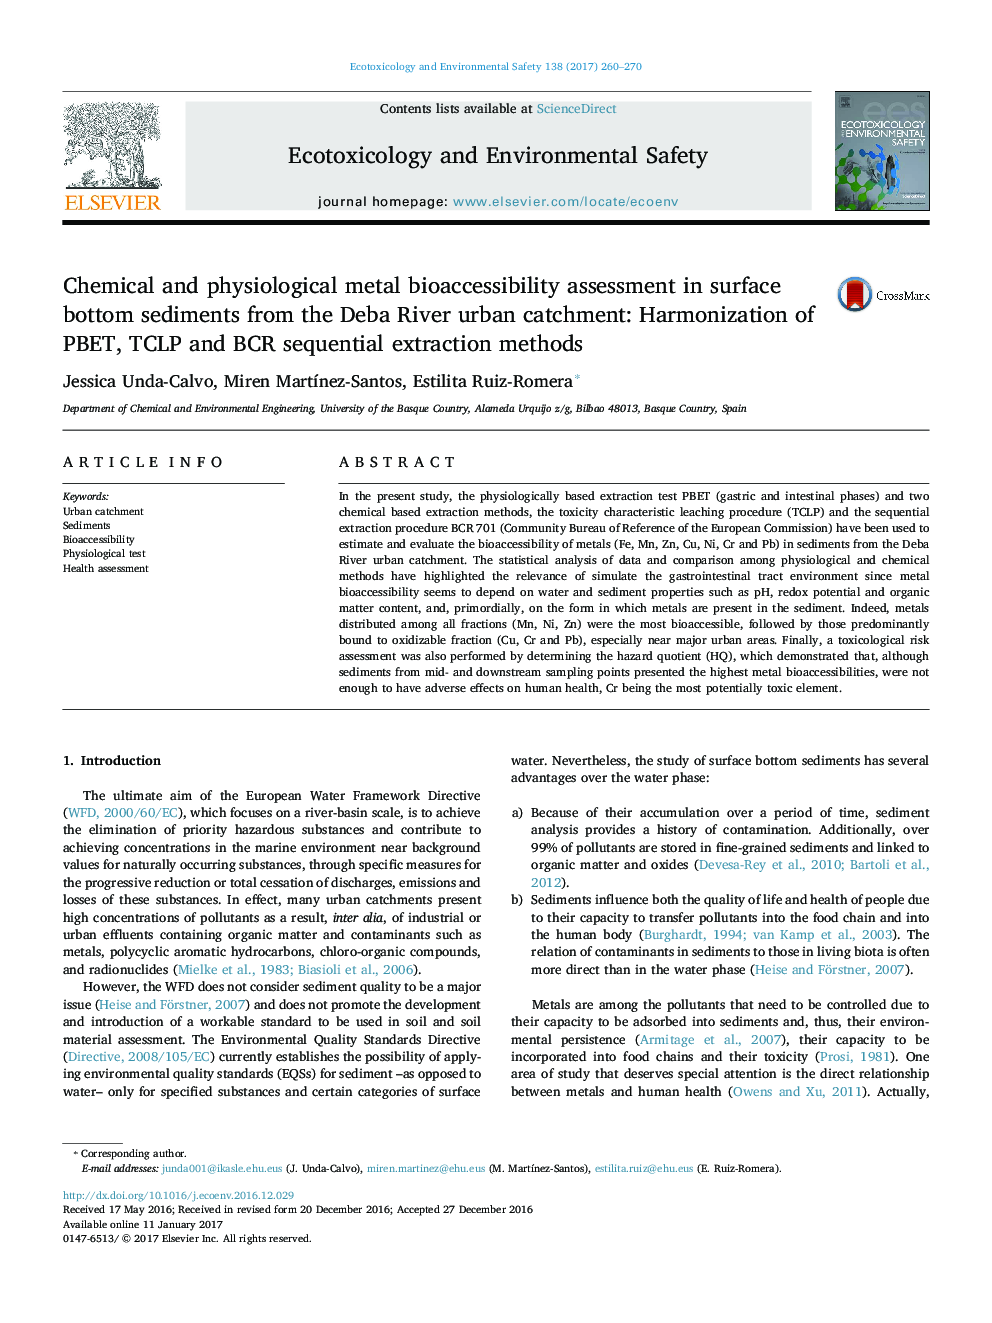 Chemical and physiological metal bioaccessibility assessment in surface bottom sediments from the Deba River urban catchment: Harmonization of PBET, TCLP and BCR sequential extraction methods